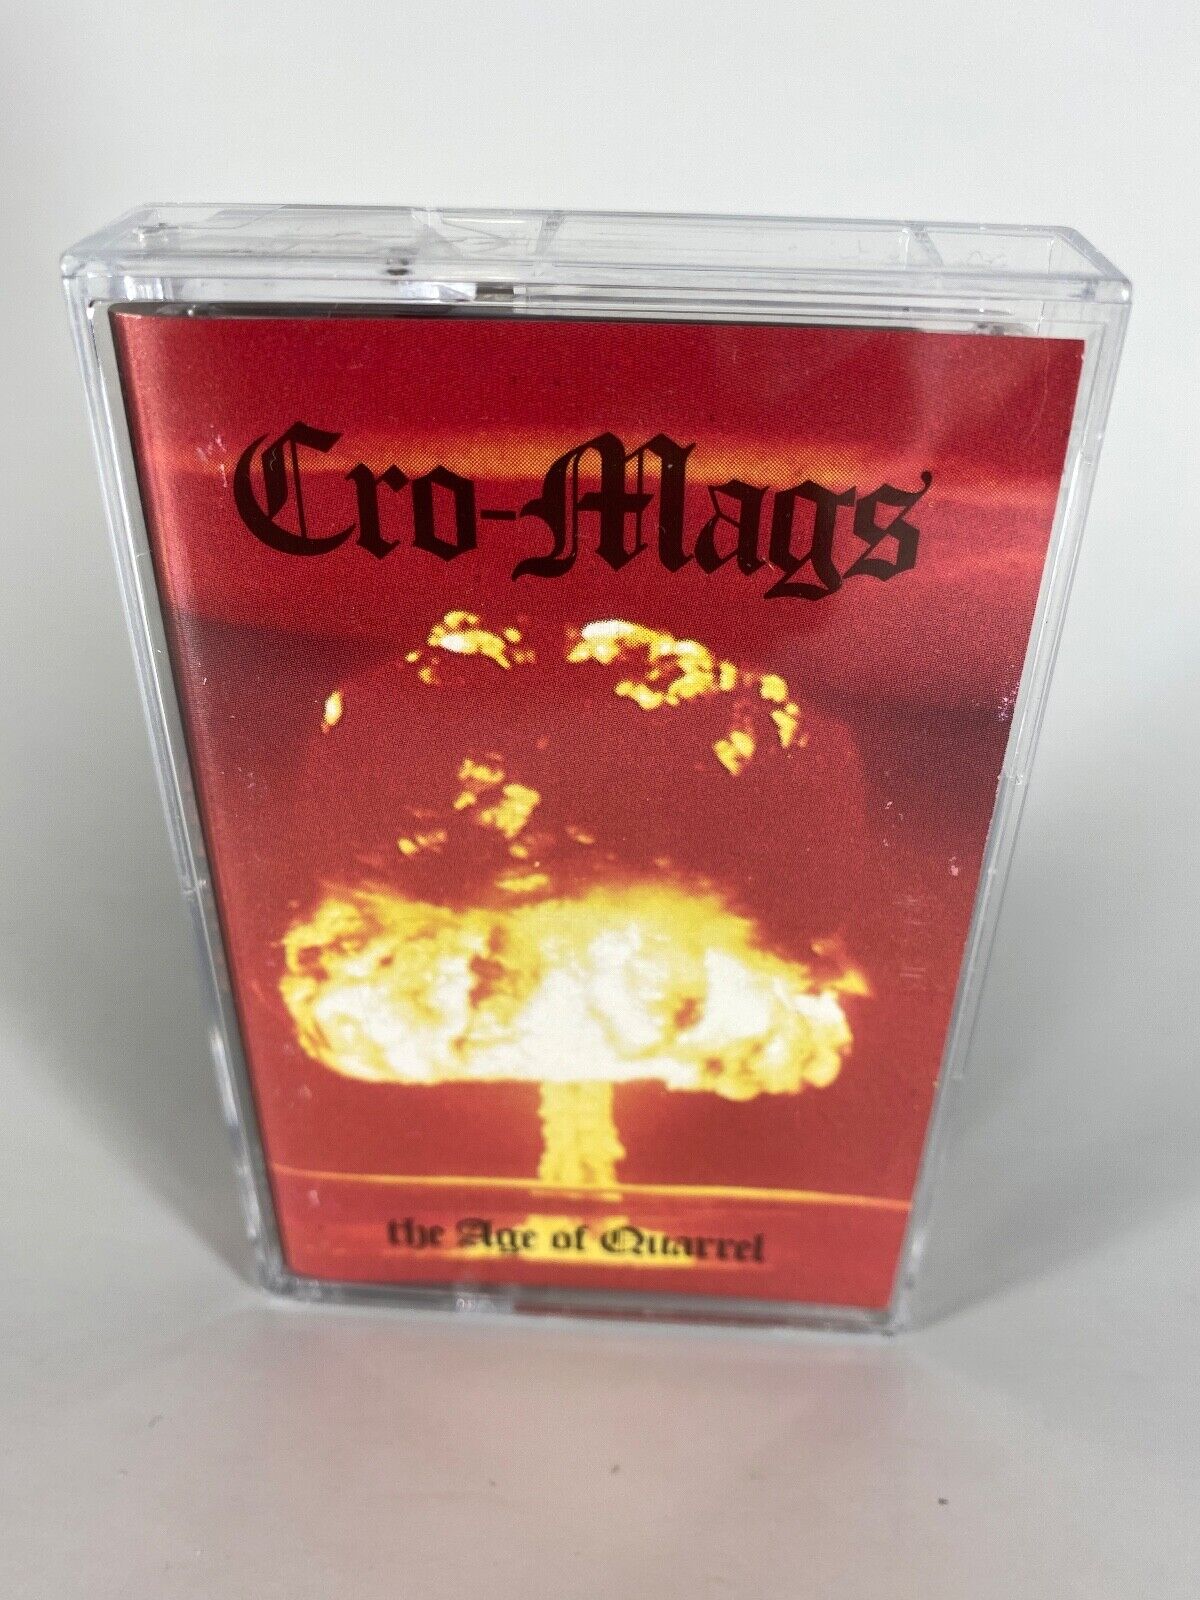 Cro-Mags : The Age Of Quarrel - Cassette - 1986 - Tested - Good